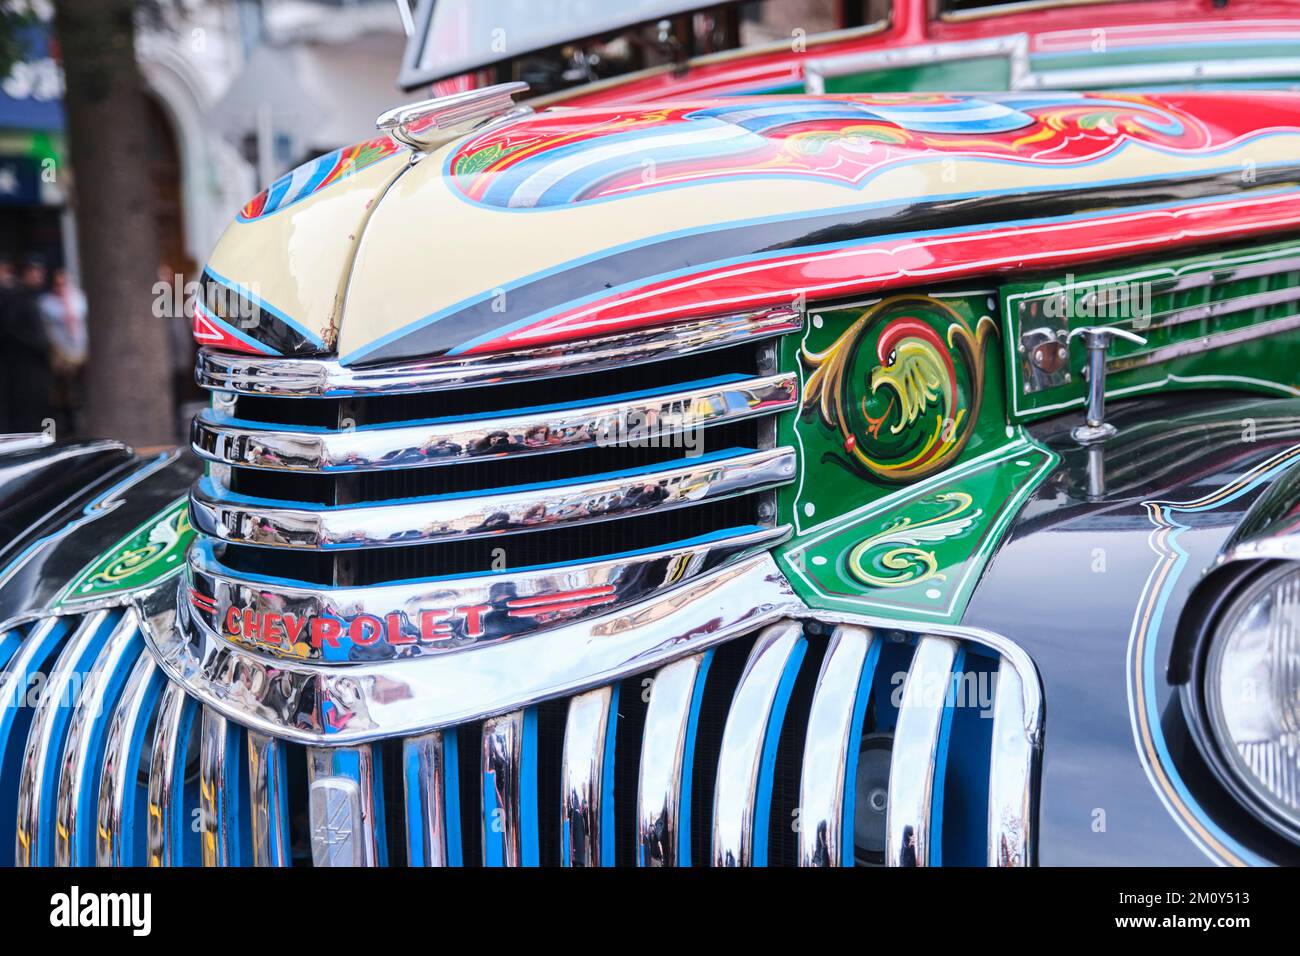 Buenos Aires, Argentina, June 20, 2022: close up view of the front, hood and grill, of a restored classic 1942 Chevrolet bus, used for public passenge Stock Photo